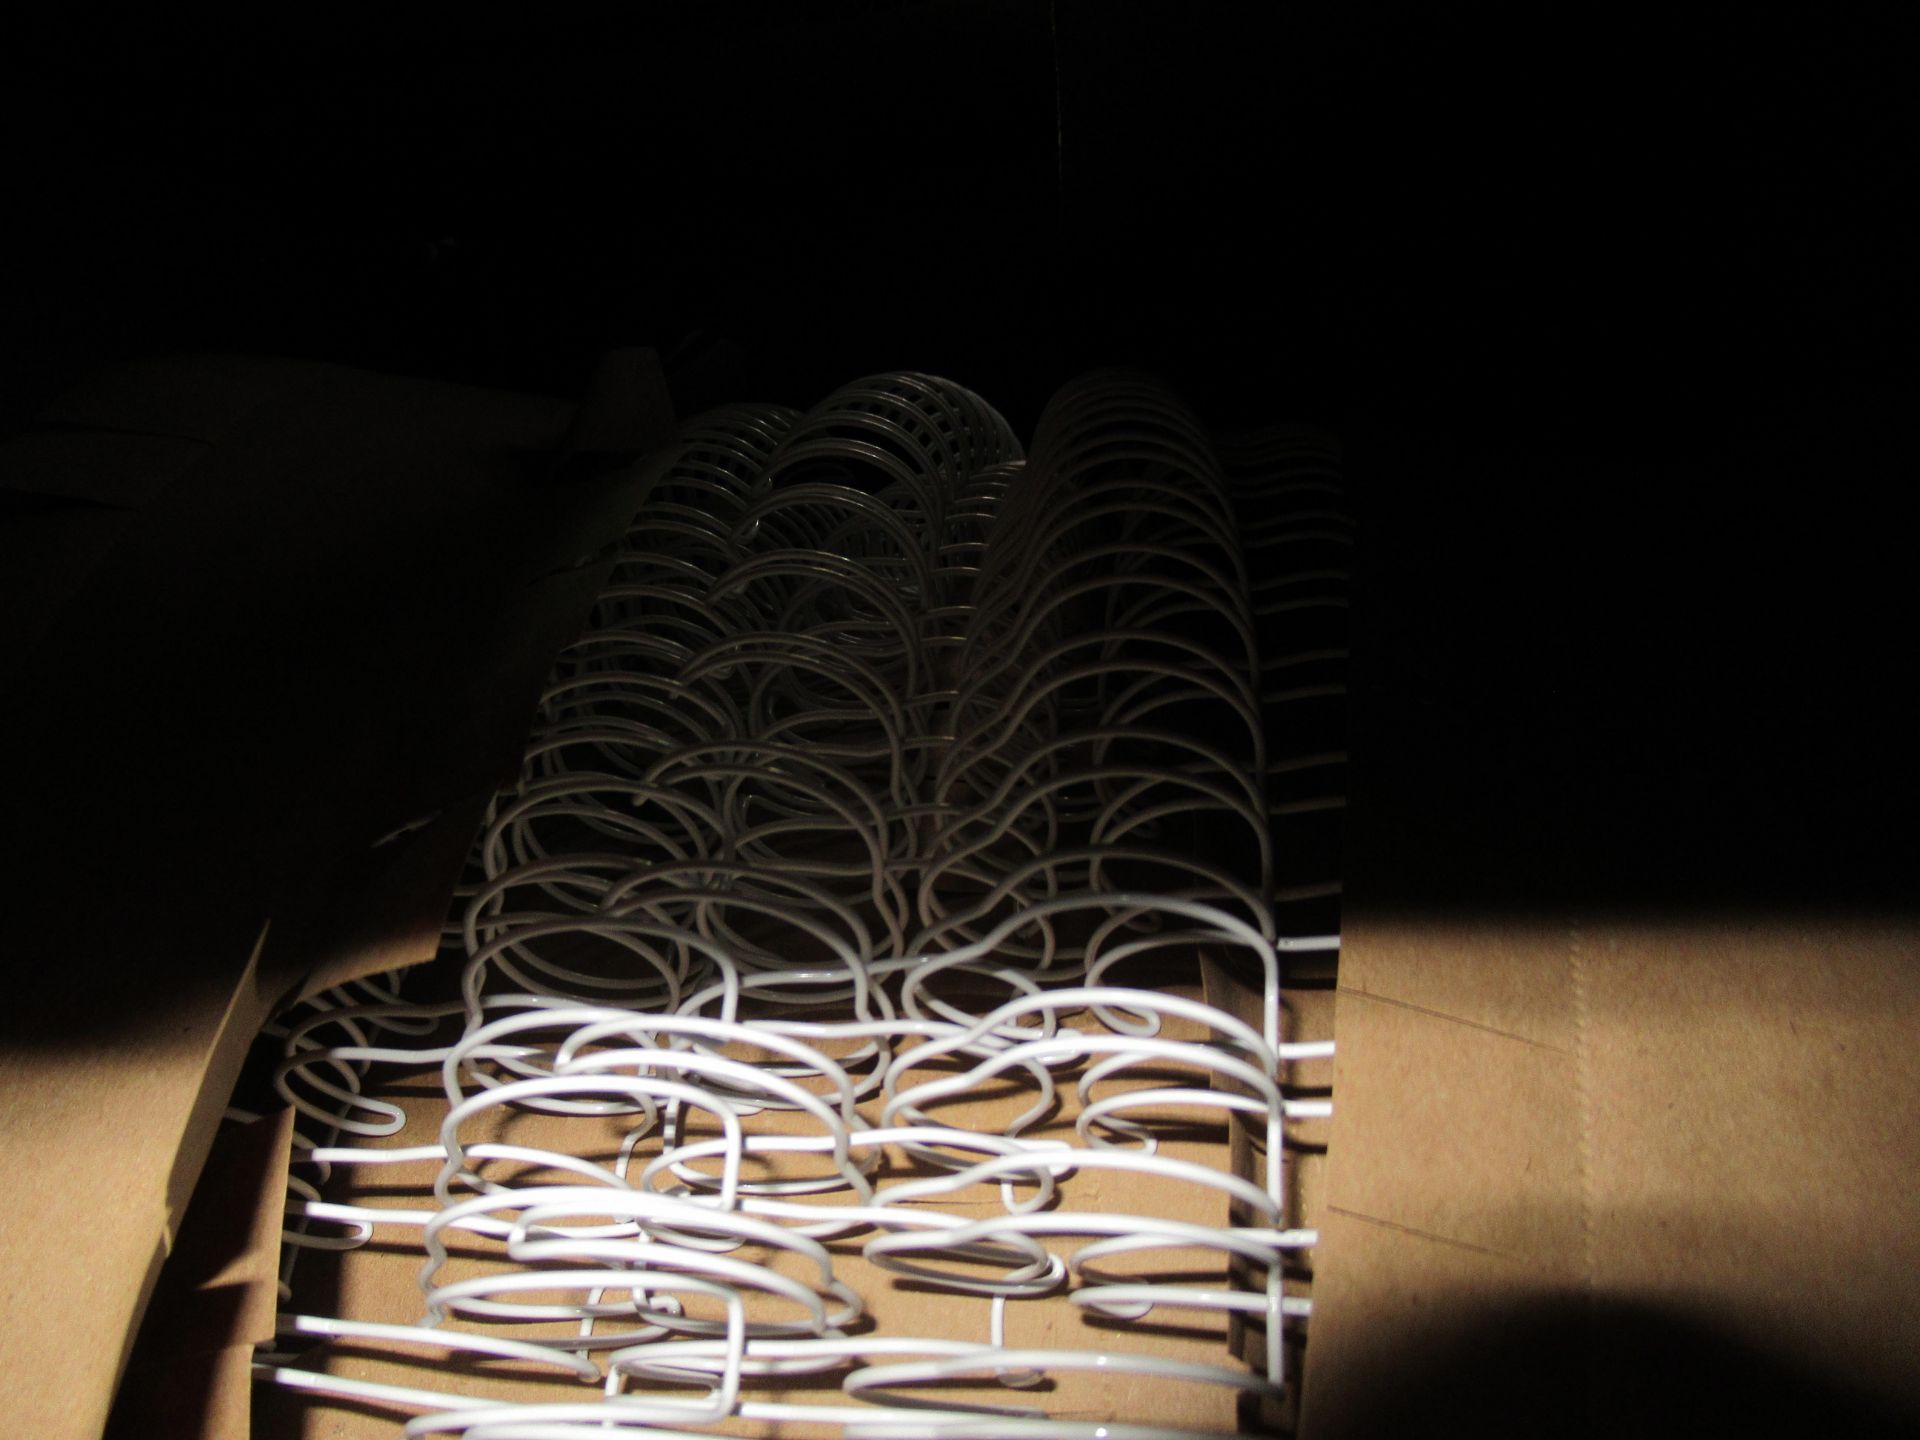 Contents of stillage to include various boxes of spiral binder/loops (stillage not included) - Image 3 of 4